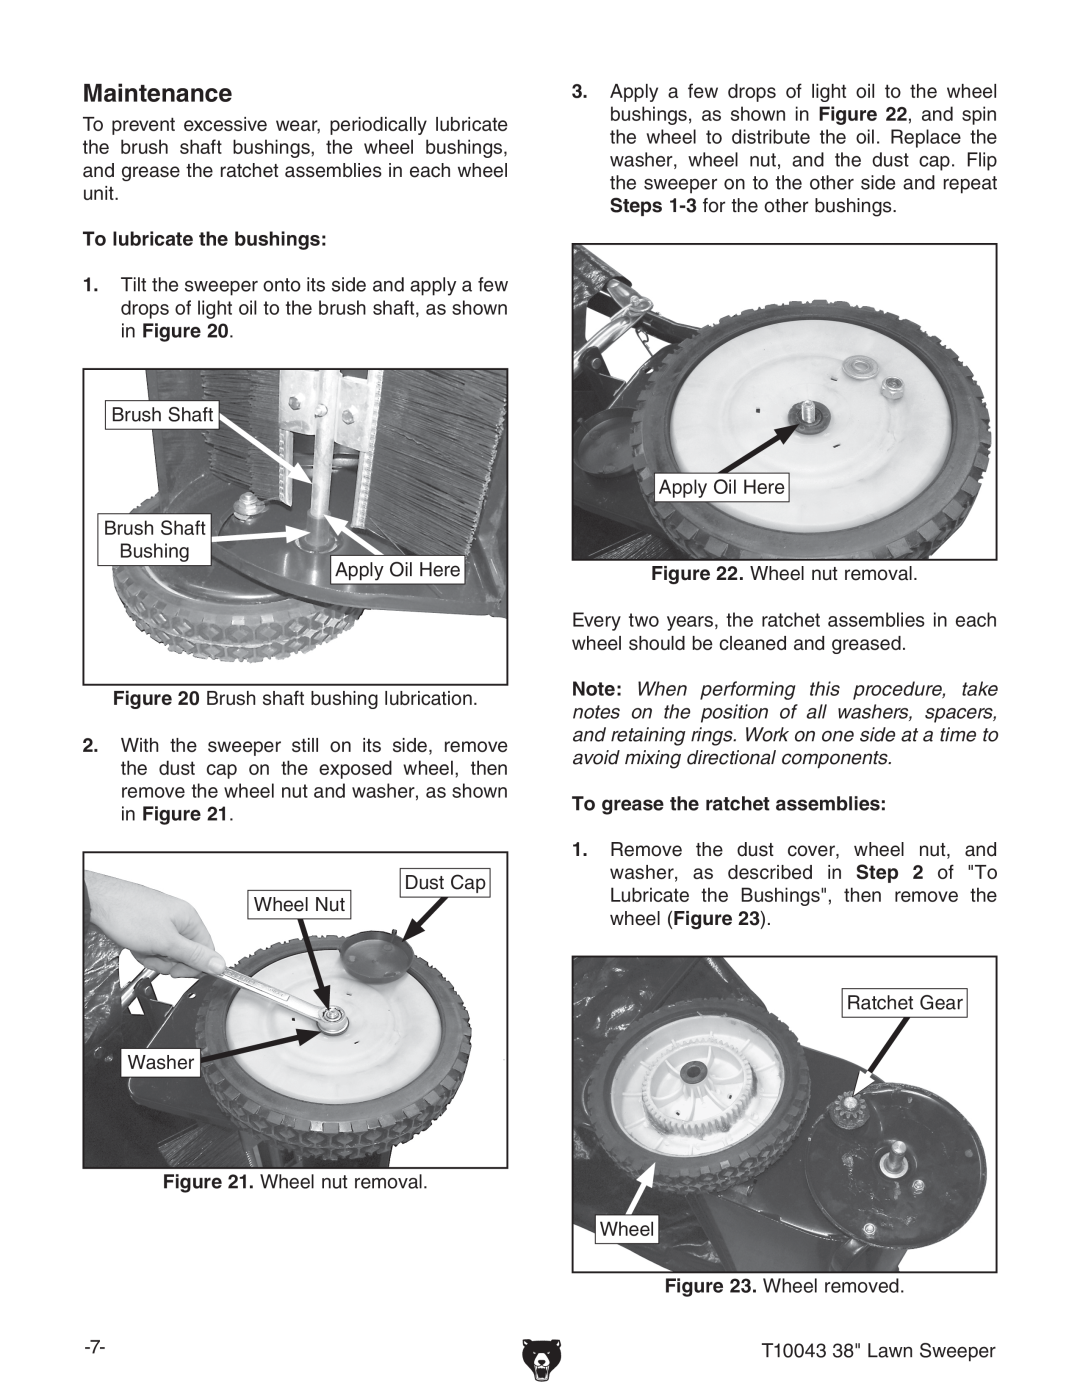 Grizzly T10043 instruction sheet Maintenance, To lubricate the bushings, To grease the ratchet assemblies 